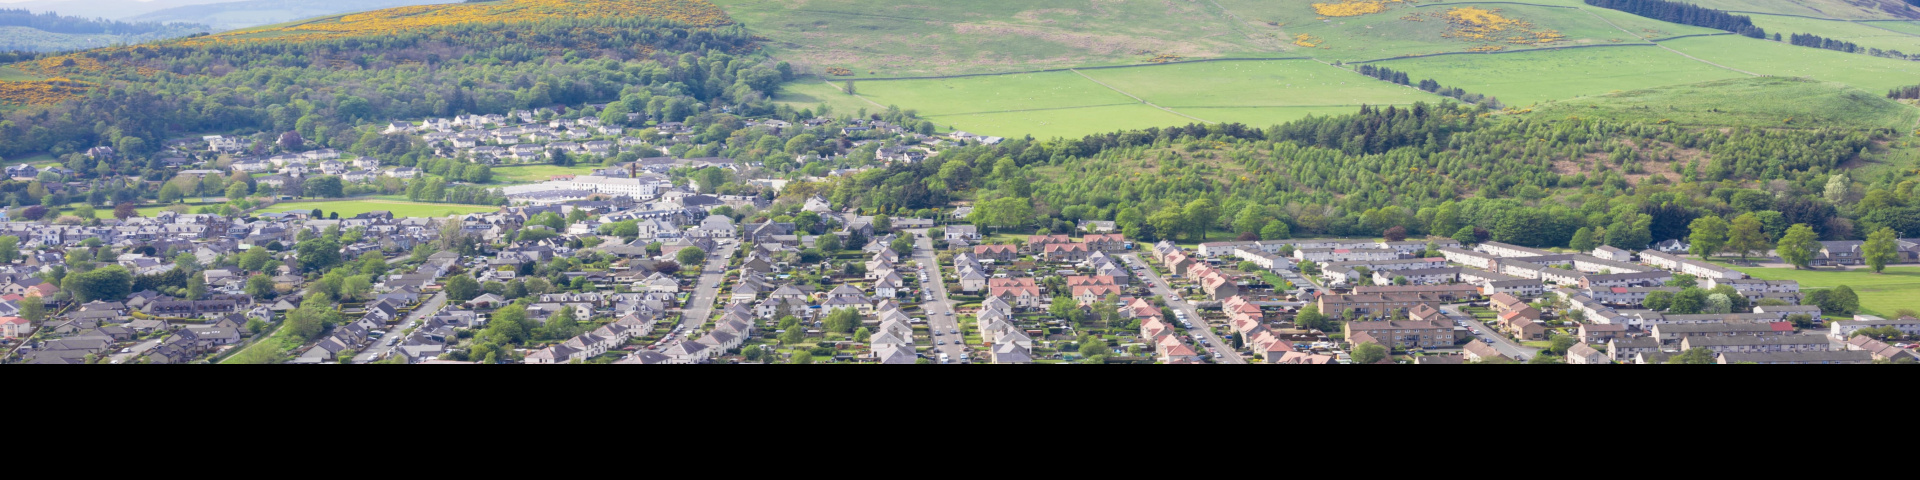 Mixed use landscape showing urban and rural land in Scotland. Credit: iStock.com - georgeclerk.